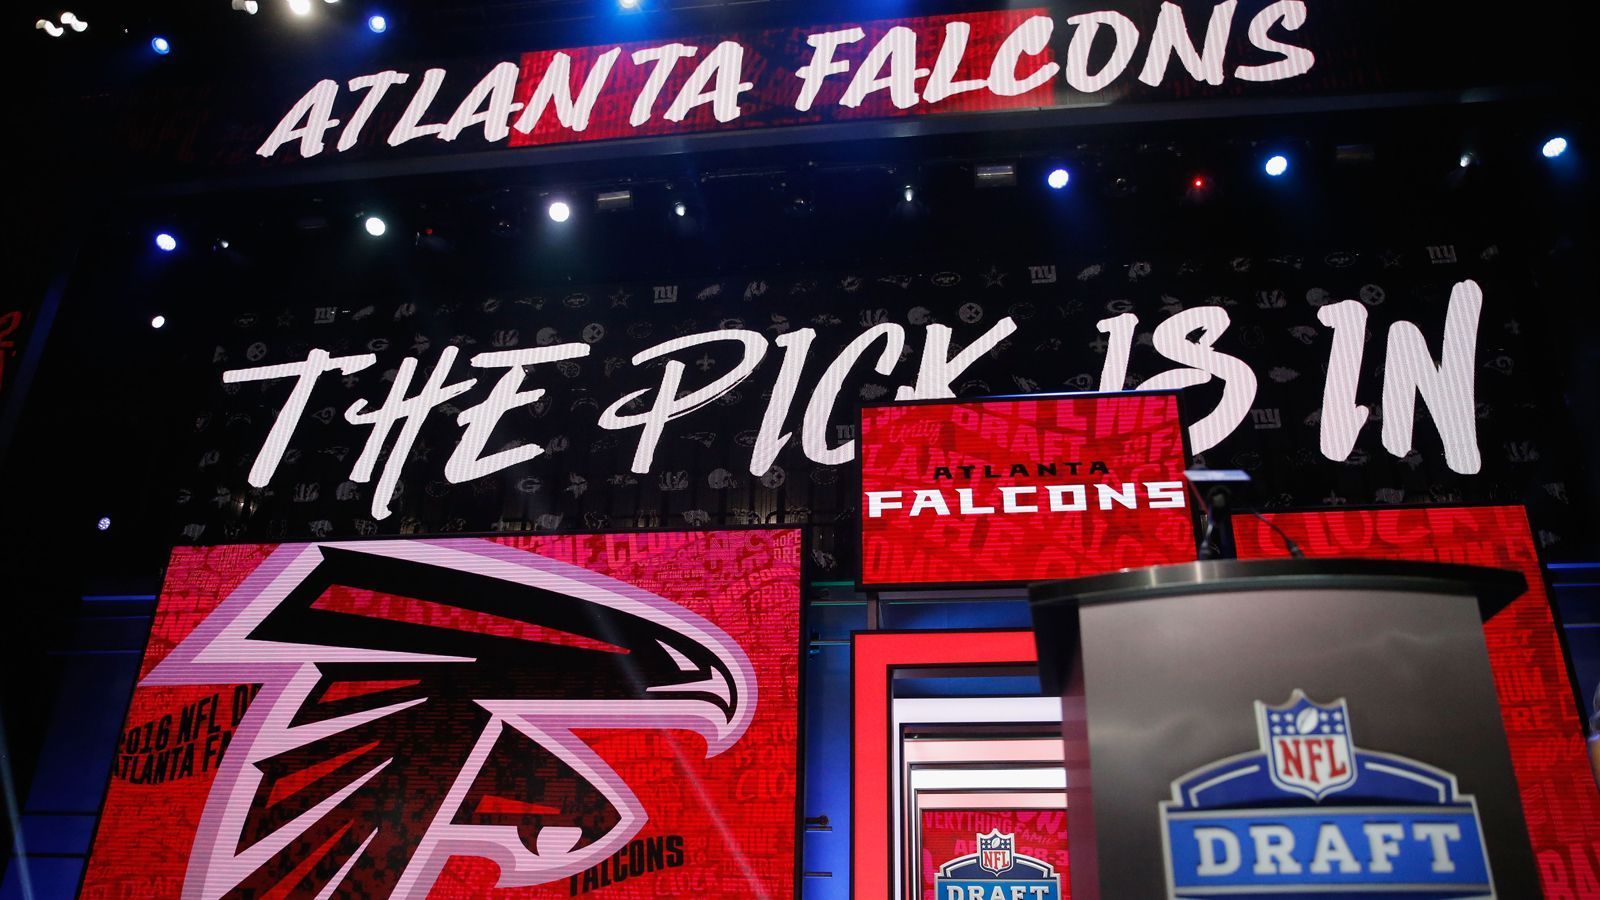 
                <strong>Atlanta Falcons </strong><br>
                &#x2022; 1. Runde (Pick 4: Kyle Pitts) - <br>&#x2022; 2. Runde (Pick 40: Richie Grant) - <br>&#x2022; 3. Runde (Pick 68: Jalen Mayfield) - <br>&#x2022; 4. Runde (Pick 114: Drew Dalman) - <br>&#x2022; 5. Runde (Pick 148: Ta'Quon Graham, Pick 182: Adetokunbo Ogundeji, Pick 183: Avery Williams) - <br>&#x2022; 6. Runde (Pick 187: Frank Darby)<br>
              